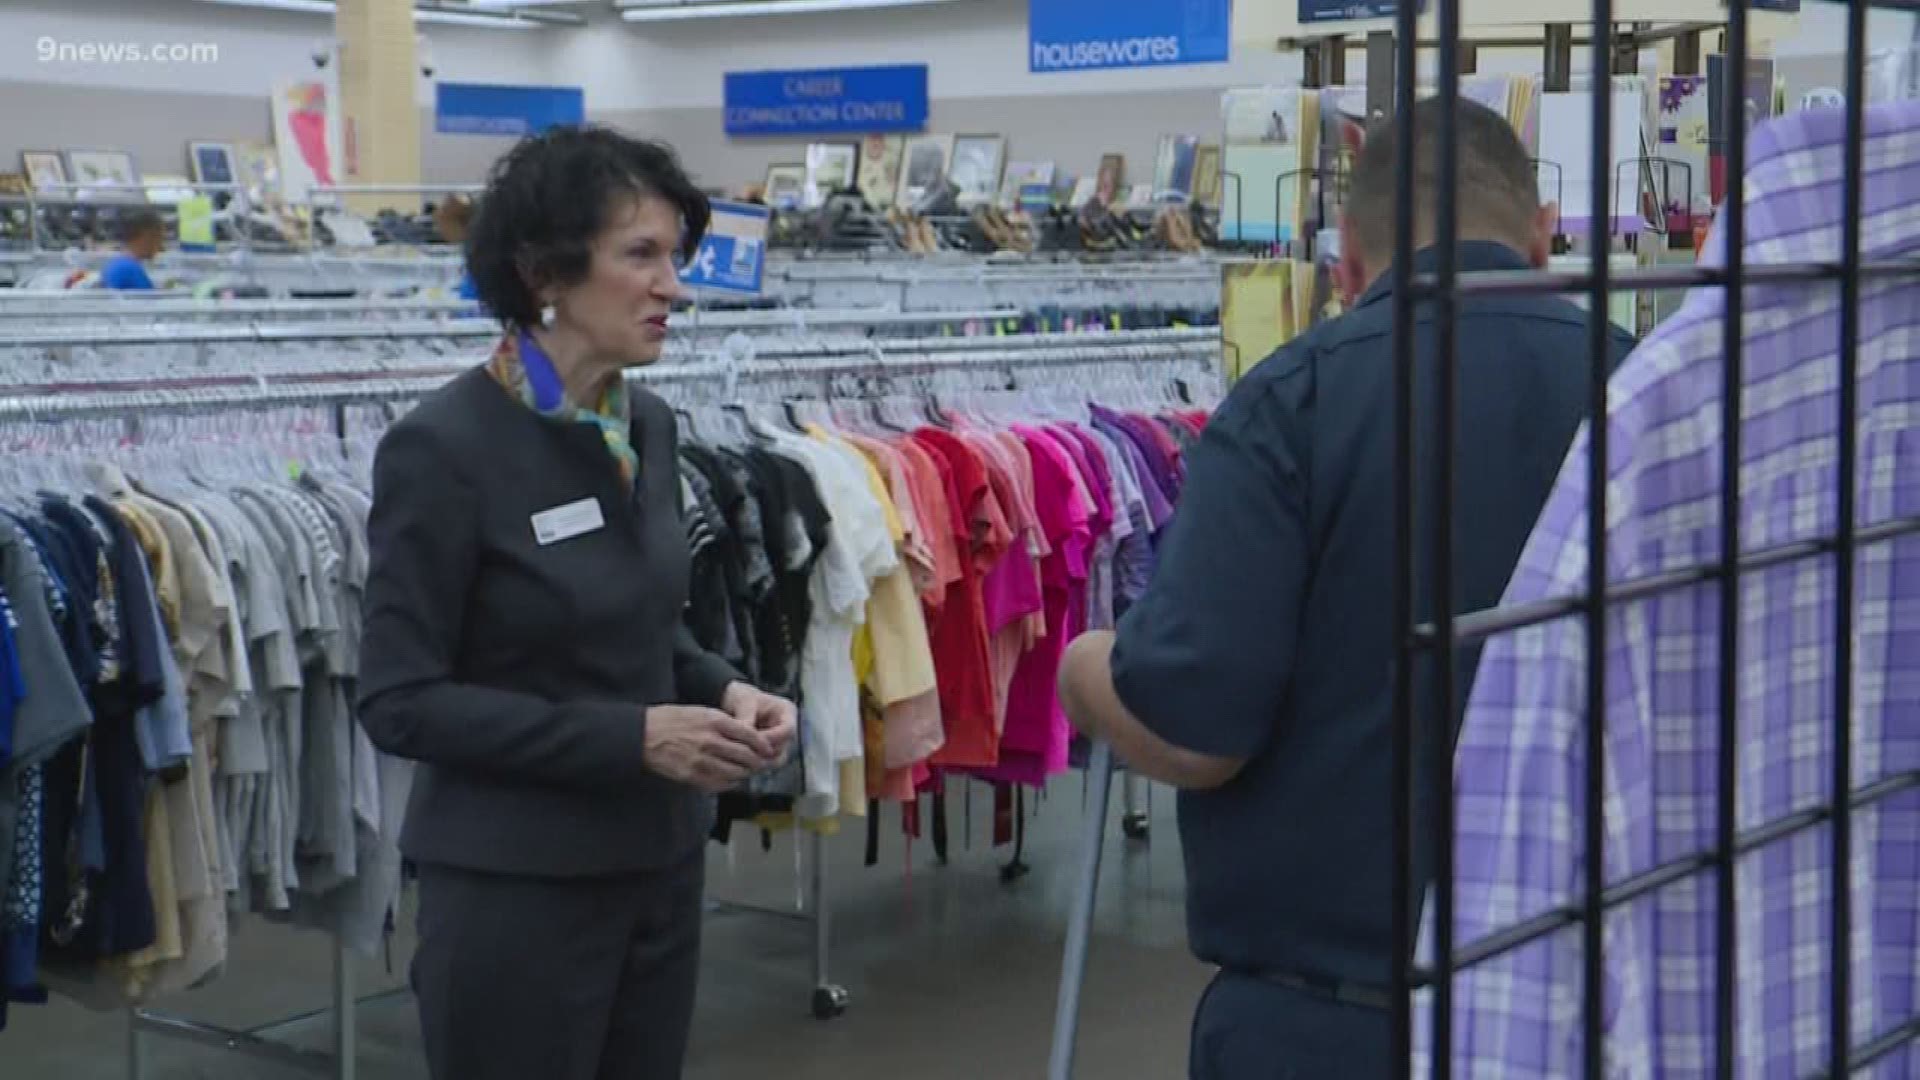 Goodwill Industries of Denver is merging with Discover Goodwill of Southern & Western Colorado which means one organization is now serving the entire state.